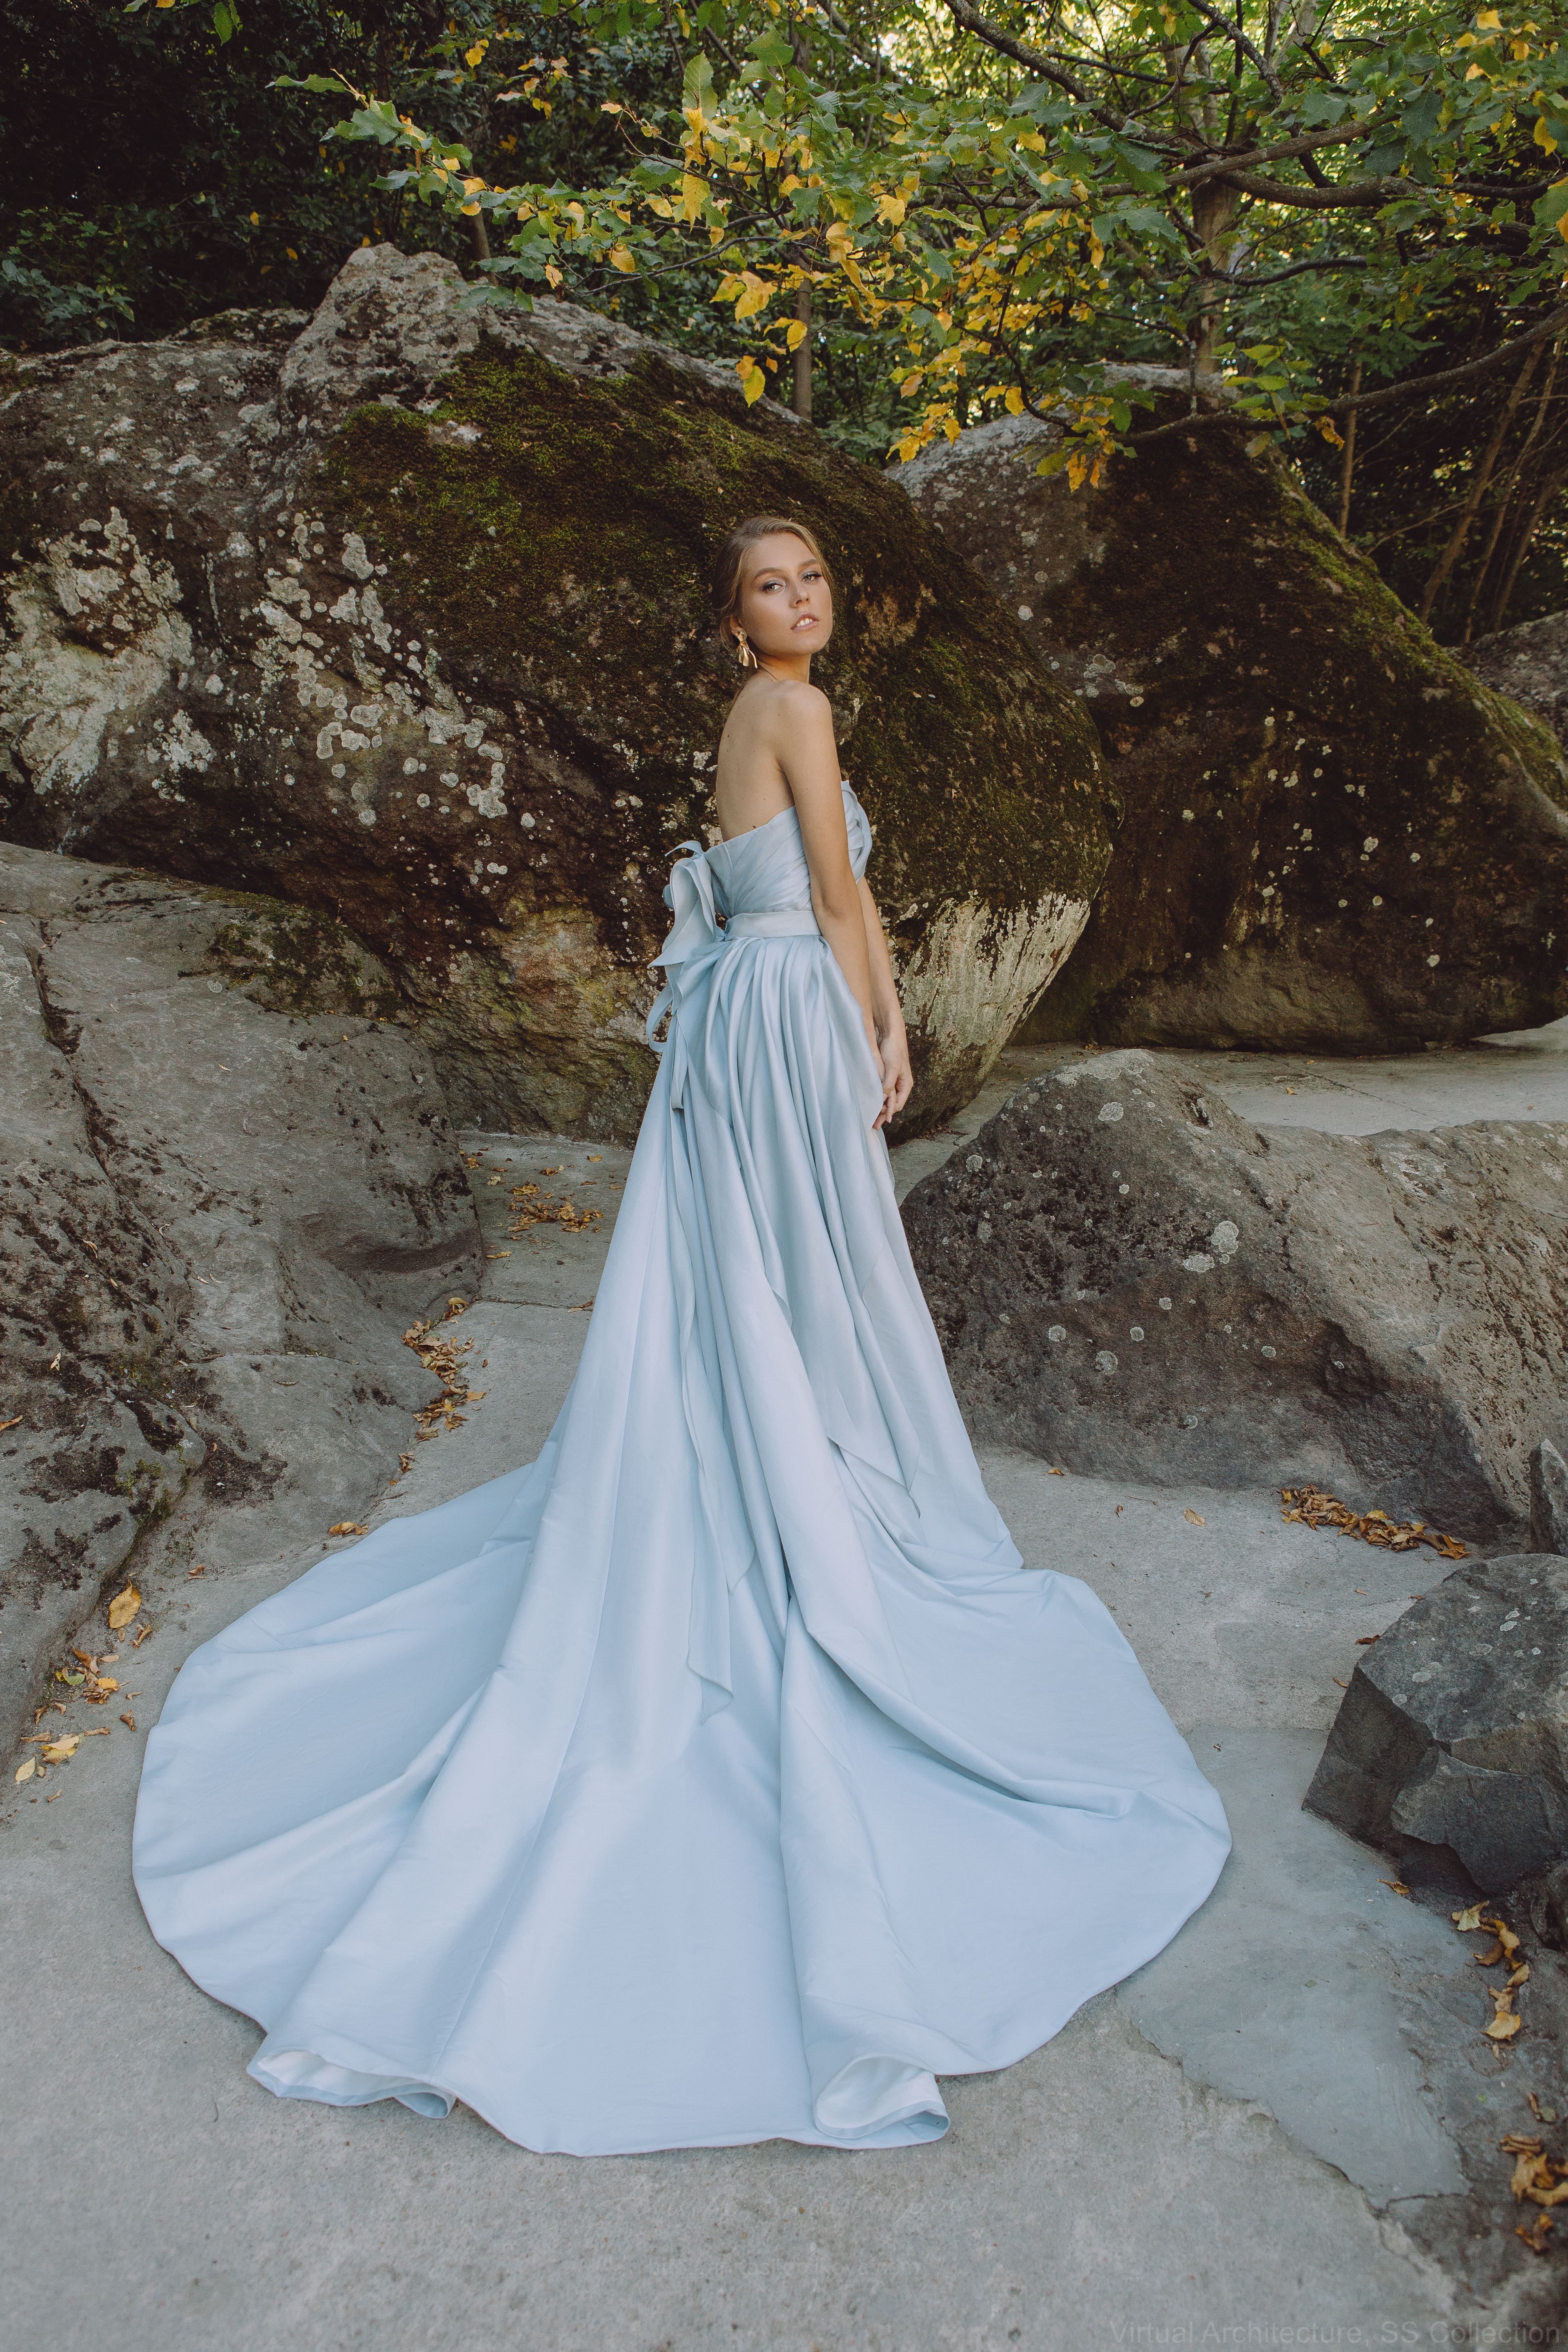 Blue Wedding Dresses: The Best Styles & What it Means - hitched.co.uk-tmf.edu.vn